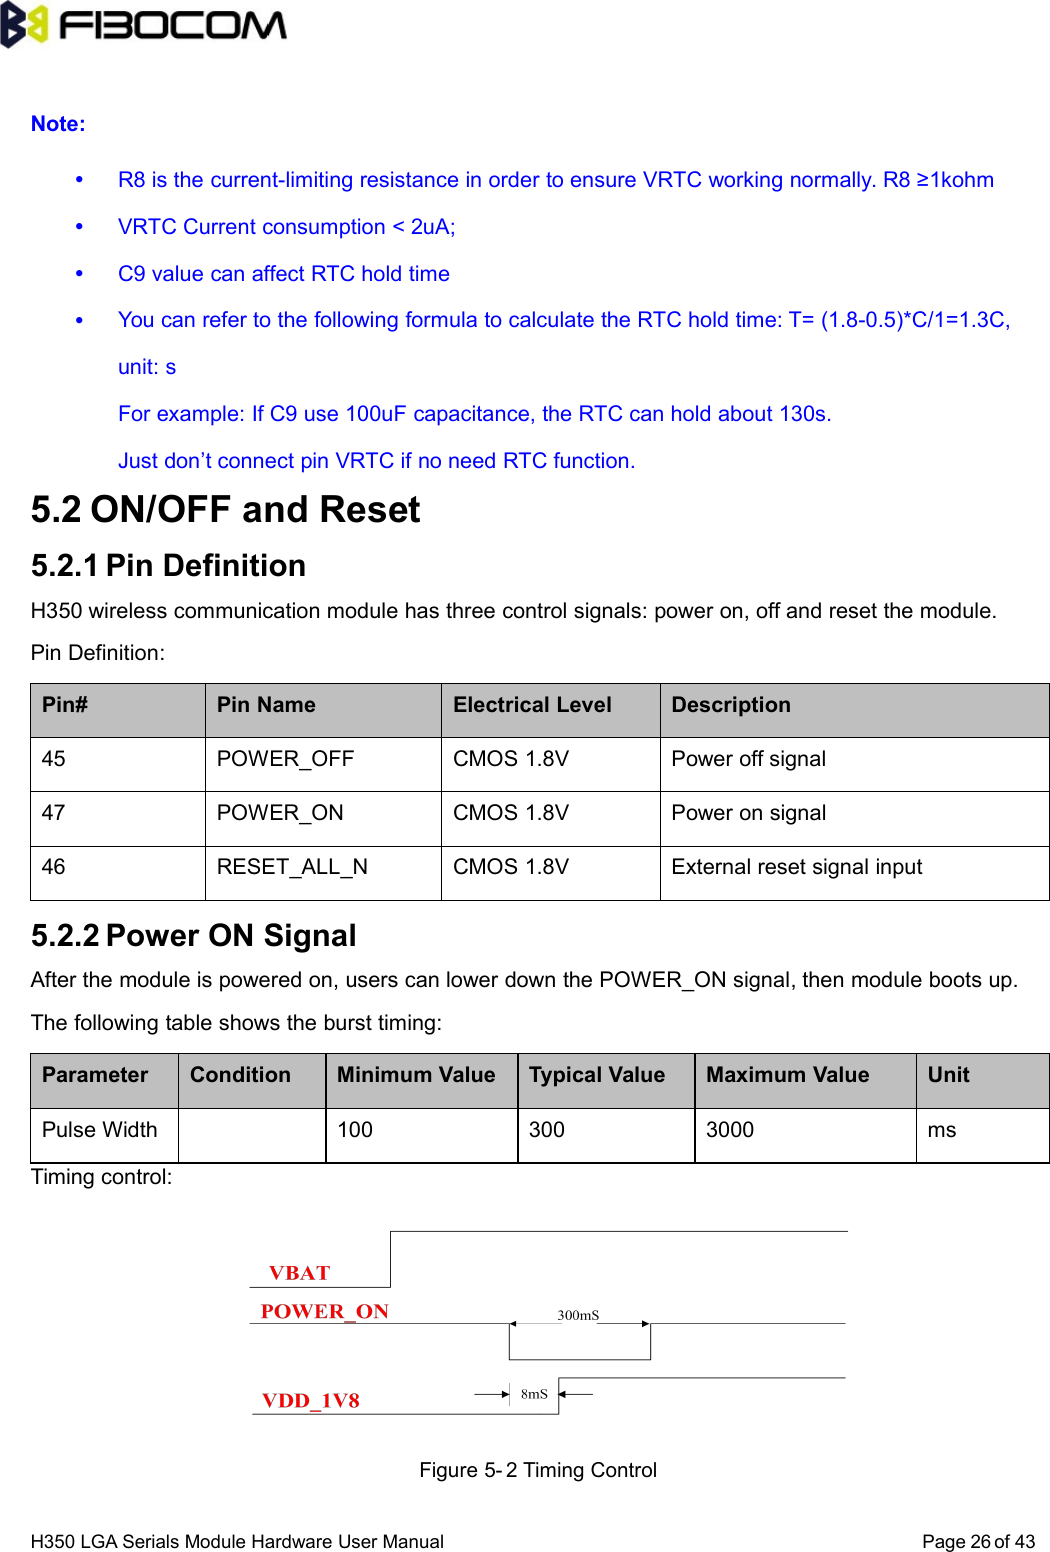 H350 LGA Serials Module Hardware User Manual Page of 4326Note:R8 is the current-limiting resistance in order to ensure VRTC working normally. R8 ≥1kohmVRTC Current consumption &lt; 2uA;C9 value can affect RTC hold timeYou can refer to the following formula to calculate the RTC hold time: T= (1.8-0.5)*C/1=1.3C,unit: sFor example: If C9 use 100uF capacitance, the RTC can hold about 130s.Just don’t connect pin VRTC if no need RTC function.5.2 ON/OFF and Reset5.2.1 Pin DefinitionH350 wireless communication module has three control signals: power on, off and reset the module.Pin Definition:Pin# Pin Name Electrical Level Description45 POWER_OFF CMOS 1.8V Power off signal47 POWER_ON CMOS 1.8V Power on signal46 RESET_ALL_N CMOS 1.8V External reset signal input5.2.2 Power ON SignalAfter the module is powered on, users can lower down the POWER_ON signal, then module boots up.The following table shows the burst timing:Parameter Condition Minimum Value Typical Value Maximum Value UnitPulse Width 100 300 3000 msTiming control:Figure 5- 2 Timing Control